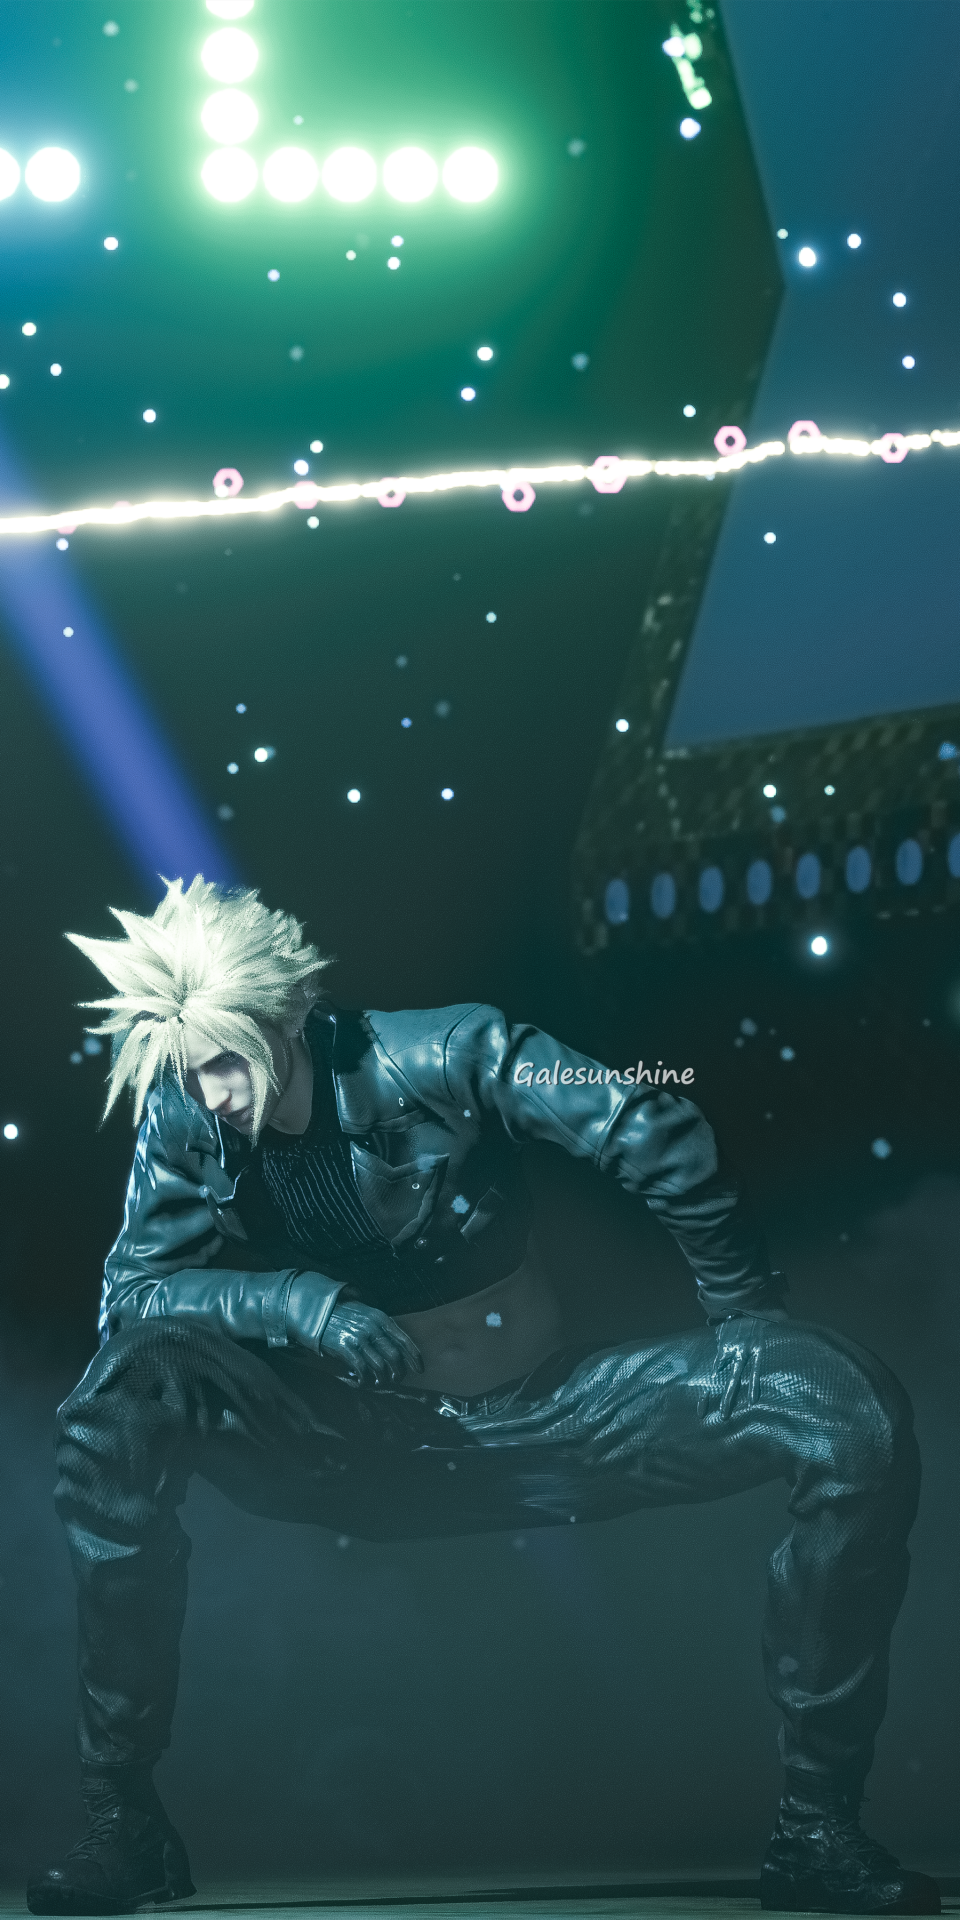 Final Fantasy 7 Remake gets an 8K Texture Pack for Cloud Strife